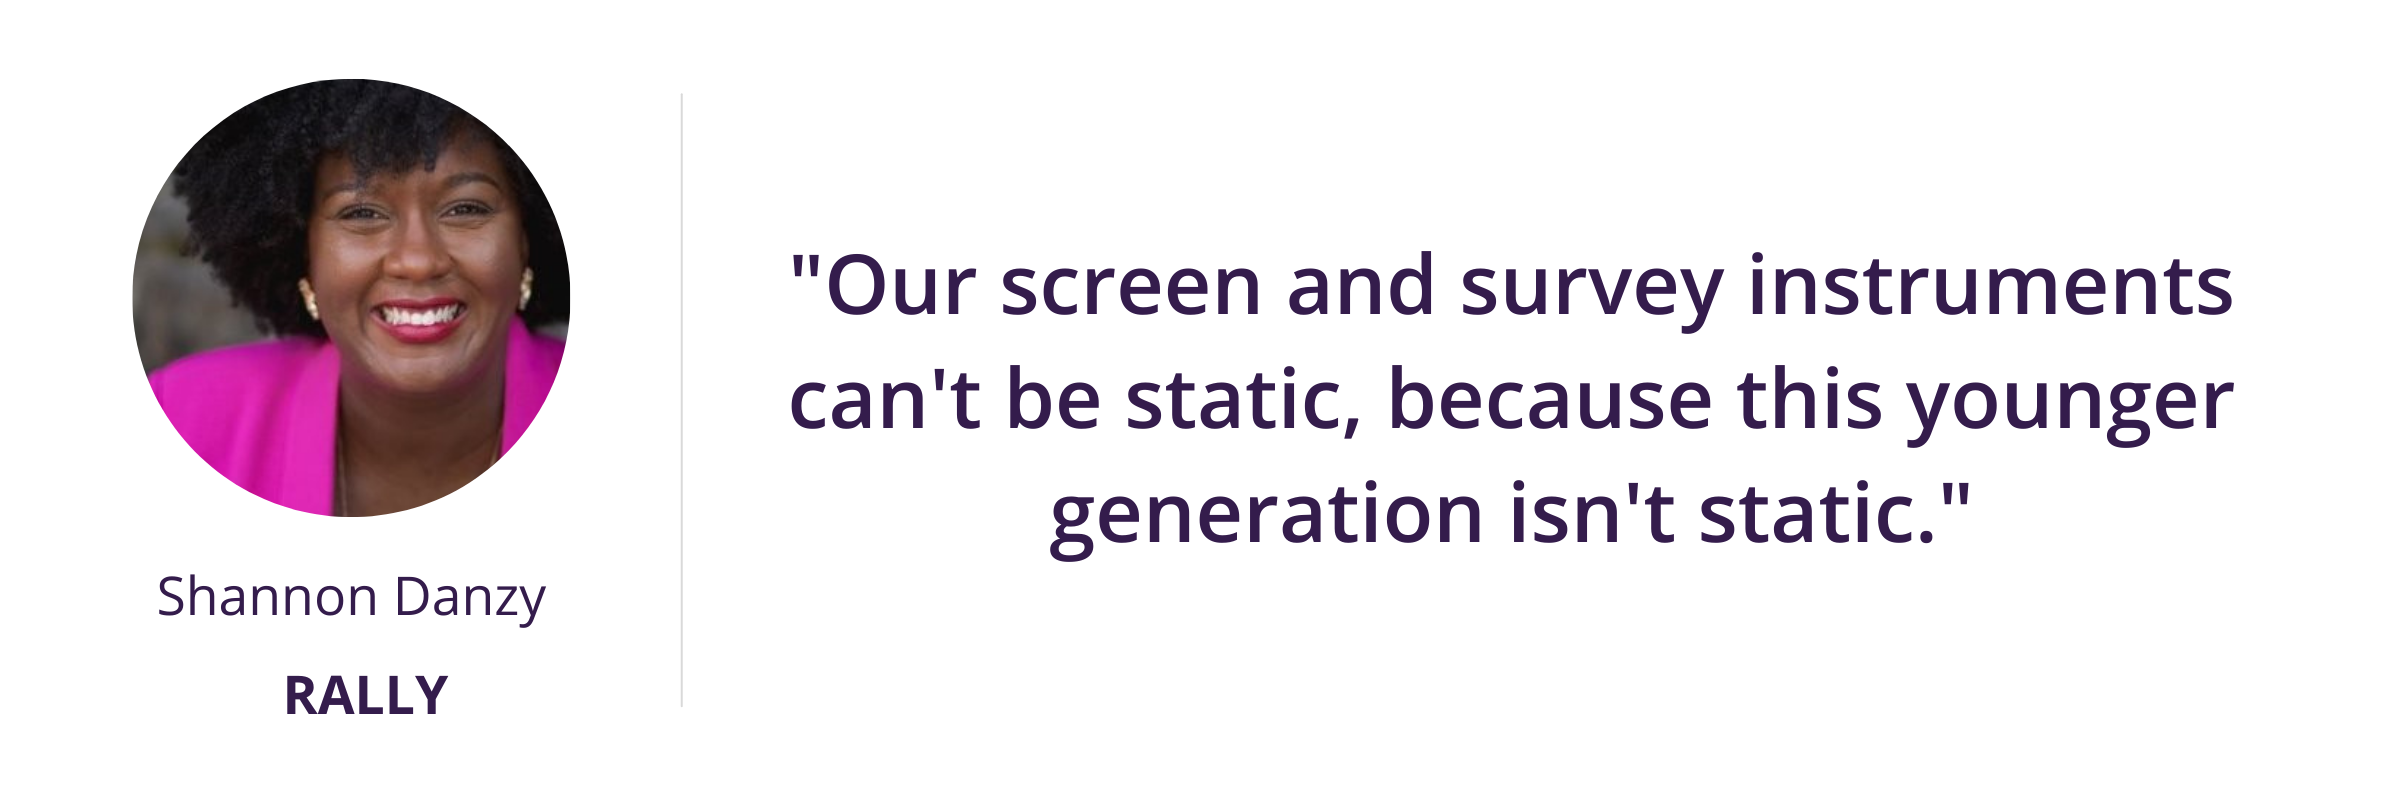 Our screen and survey instruments can't be static, because this younger generation isn't static.